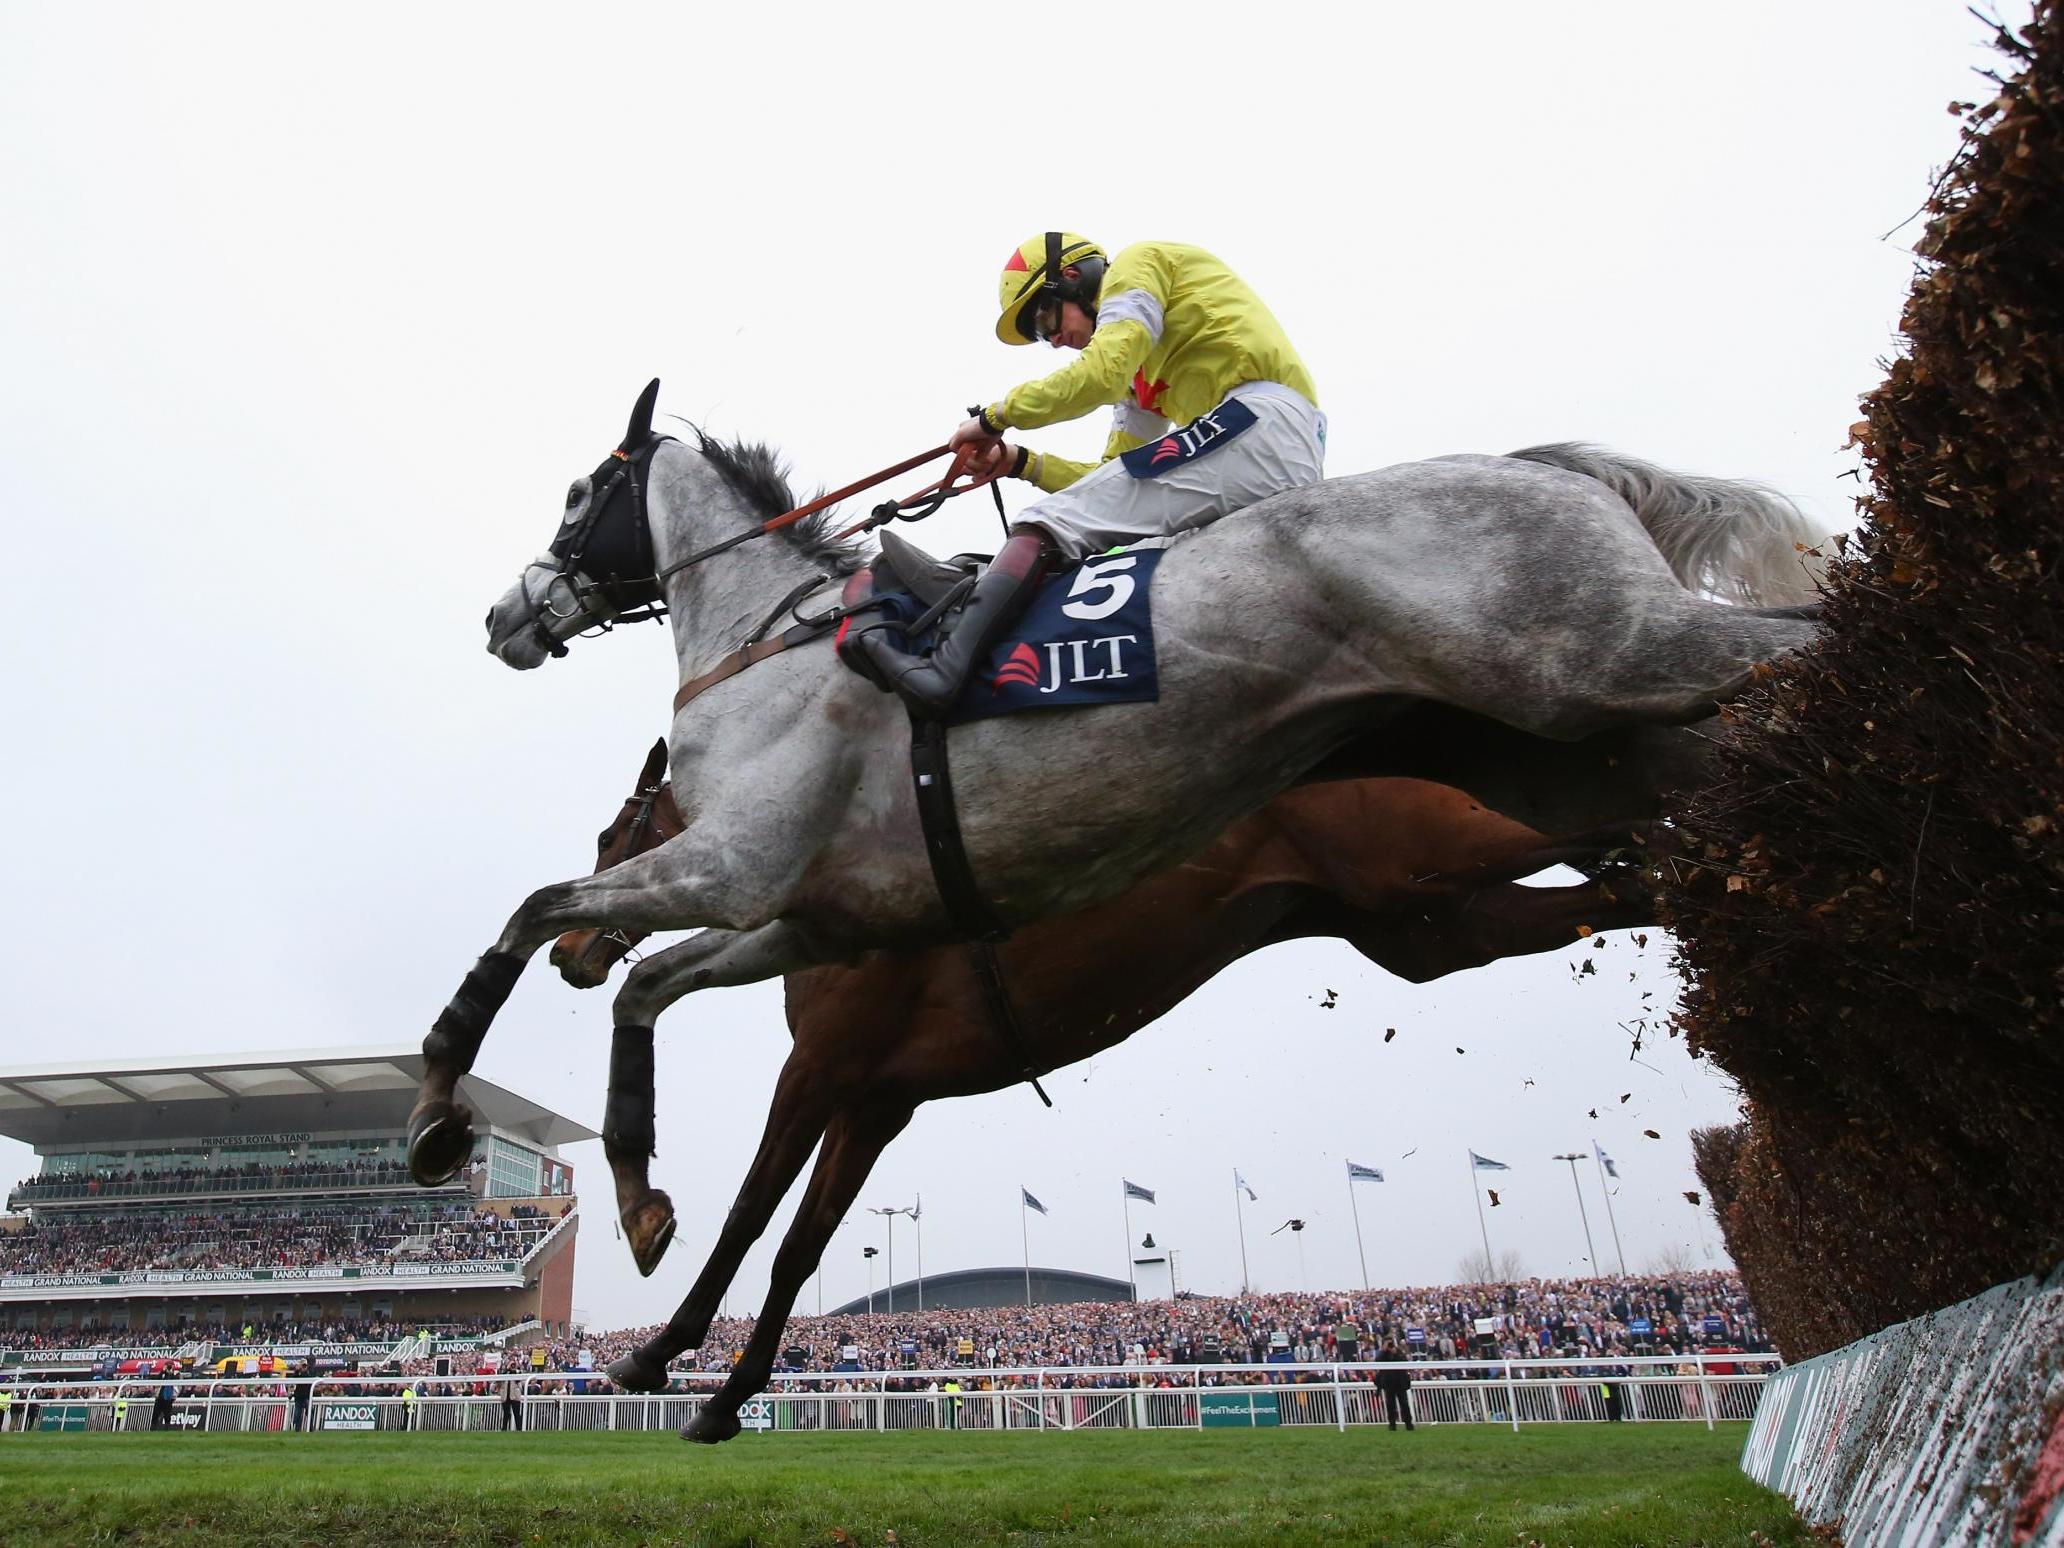 Politologue clears the last fence during the JLT Melling Chase on Ladies Day at Aintree